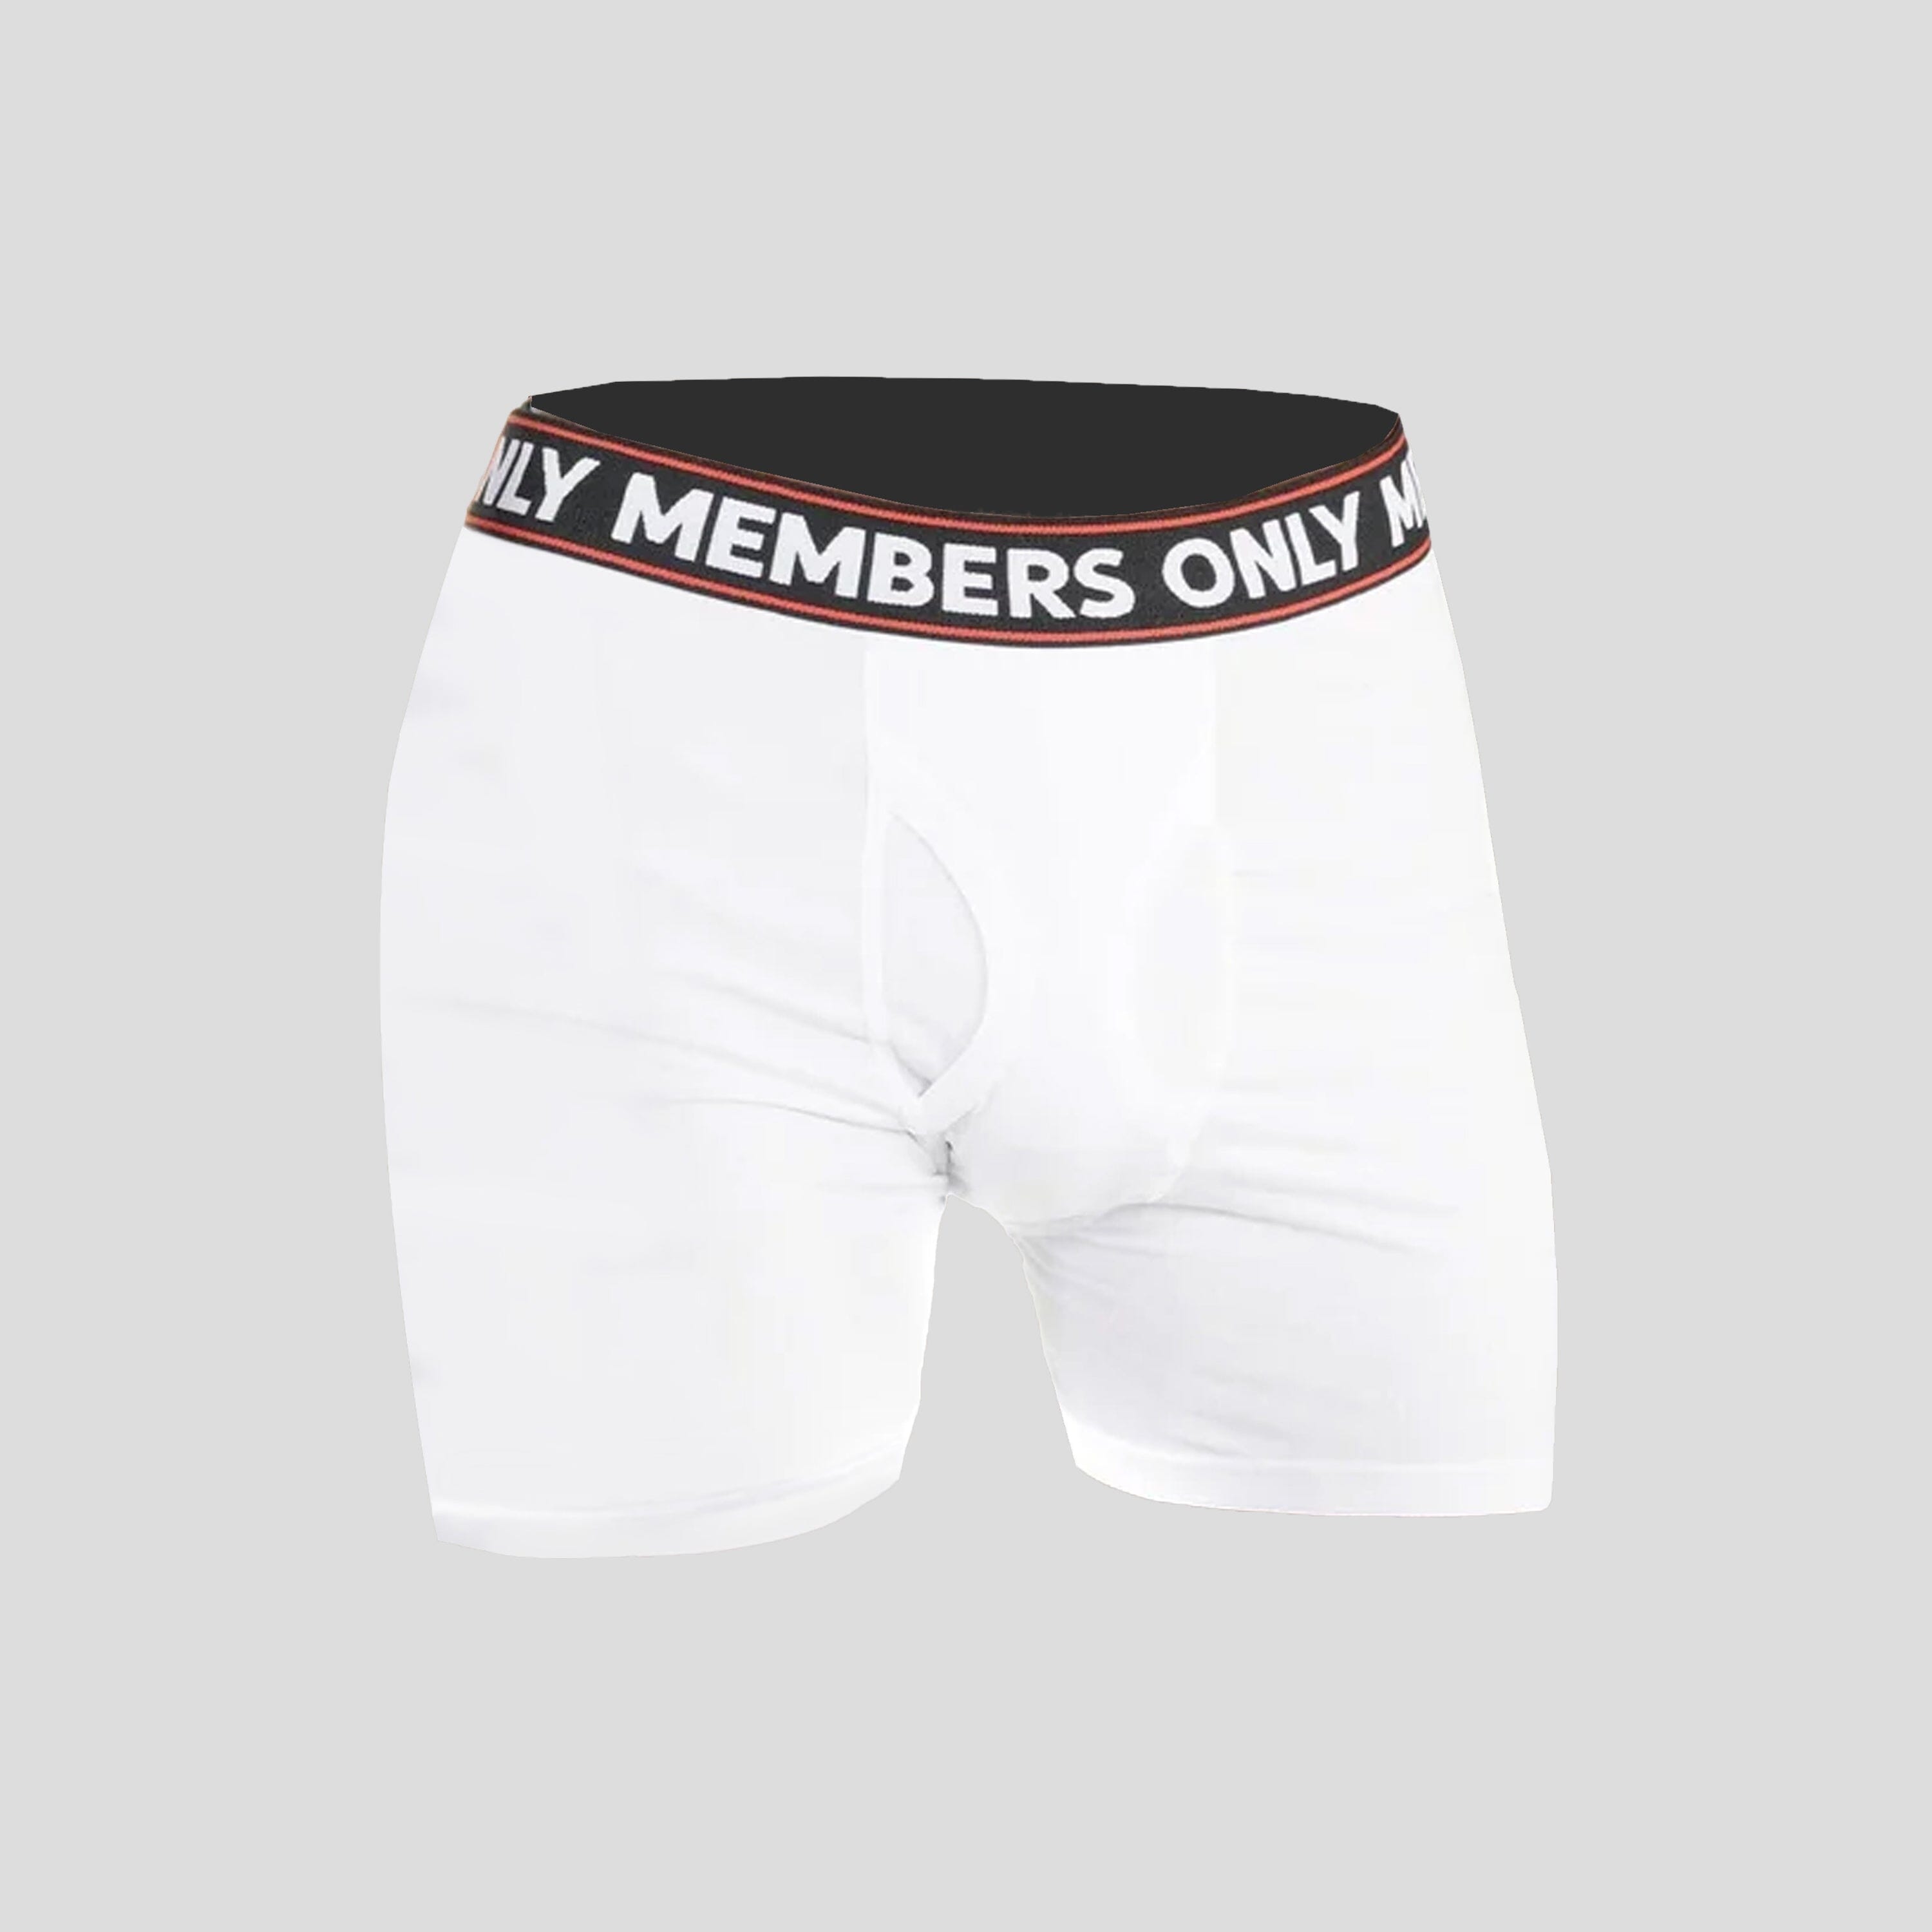 The MicroAir Sports Underwear Collection offers a variety of men's